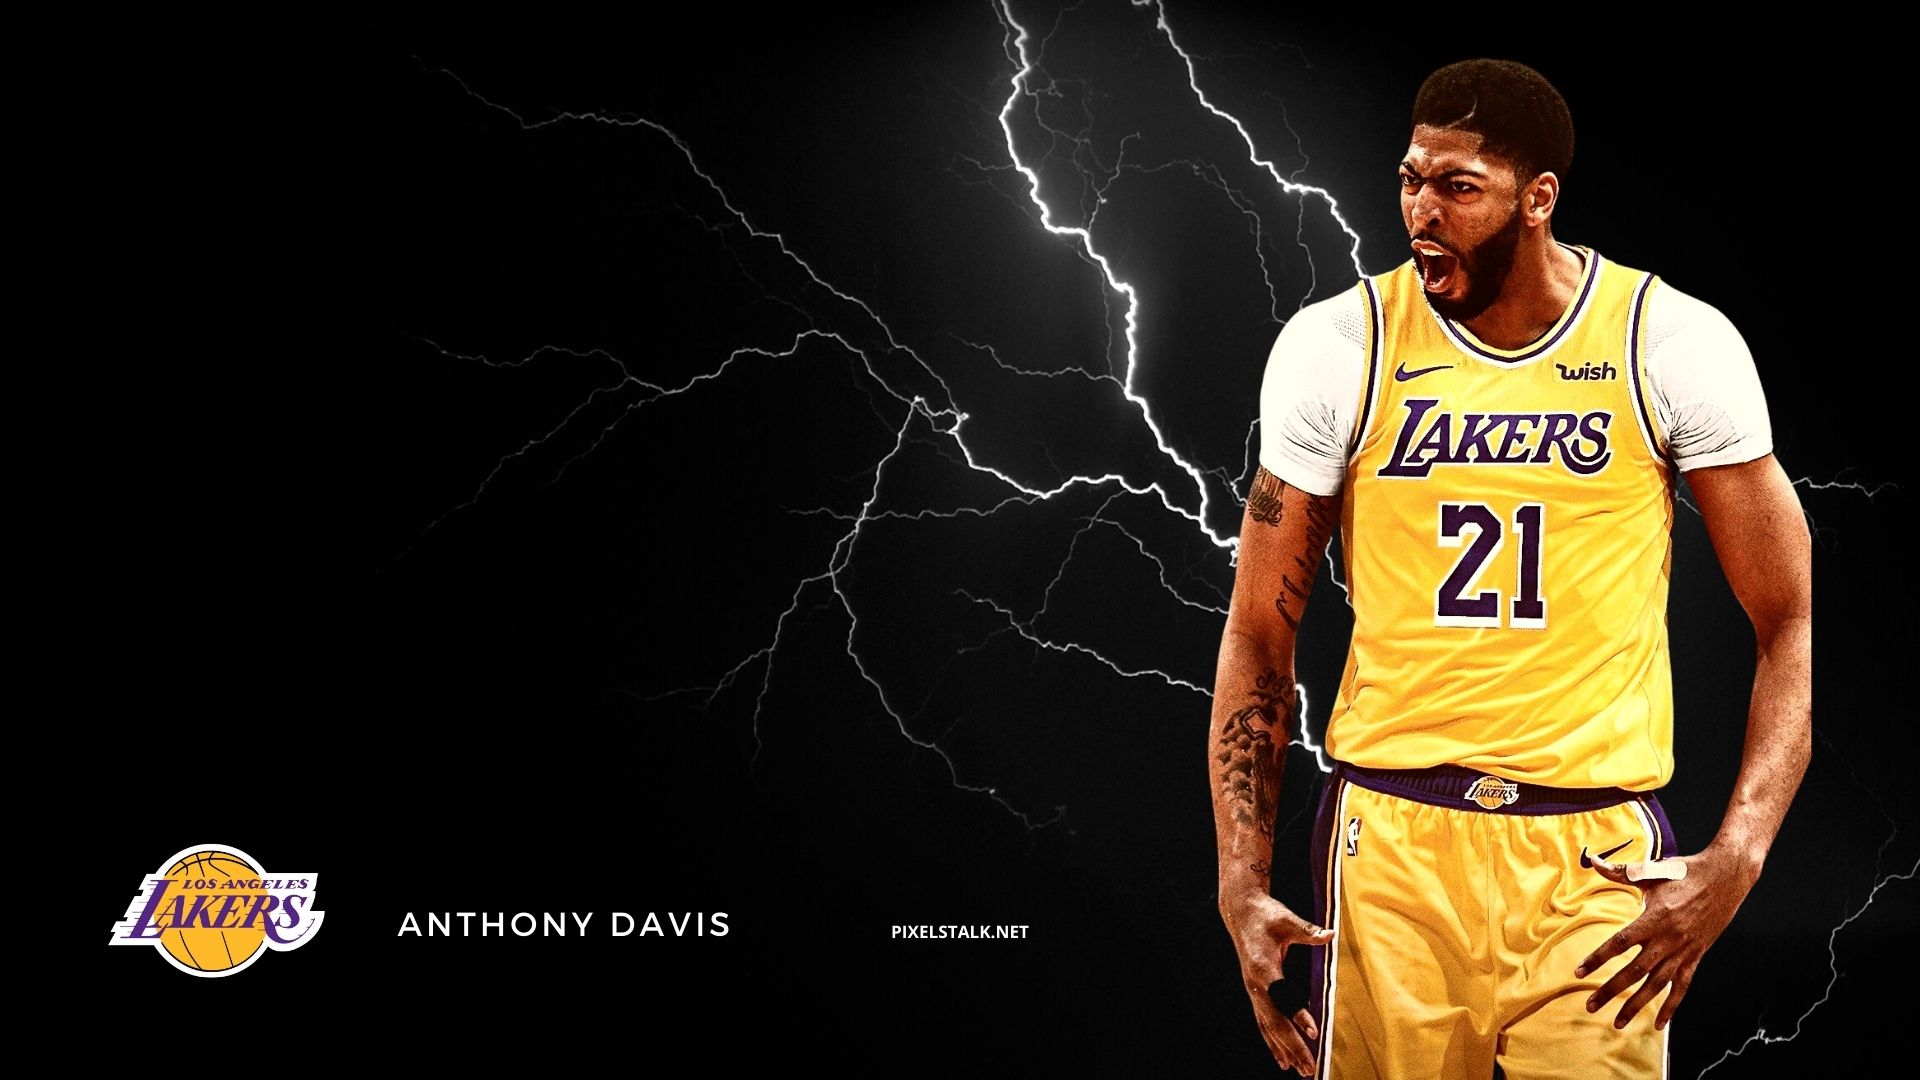 Anthony Davis 2021 Wallpapers - Wallpaper Cave